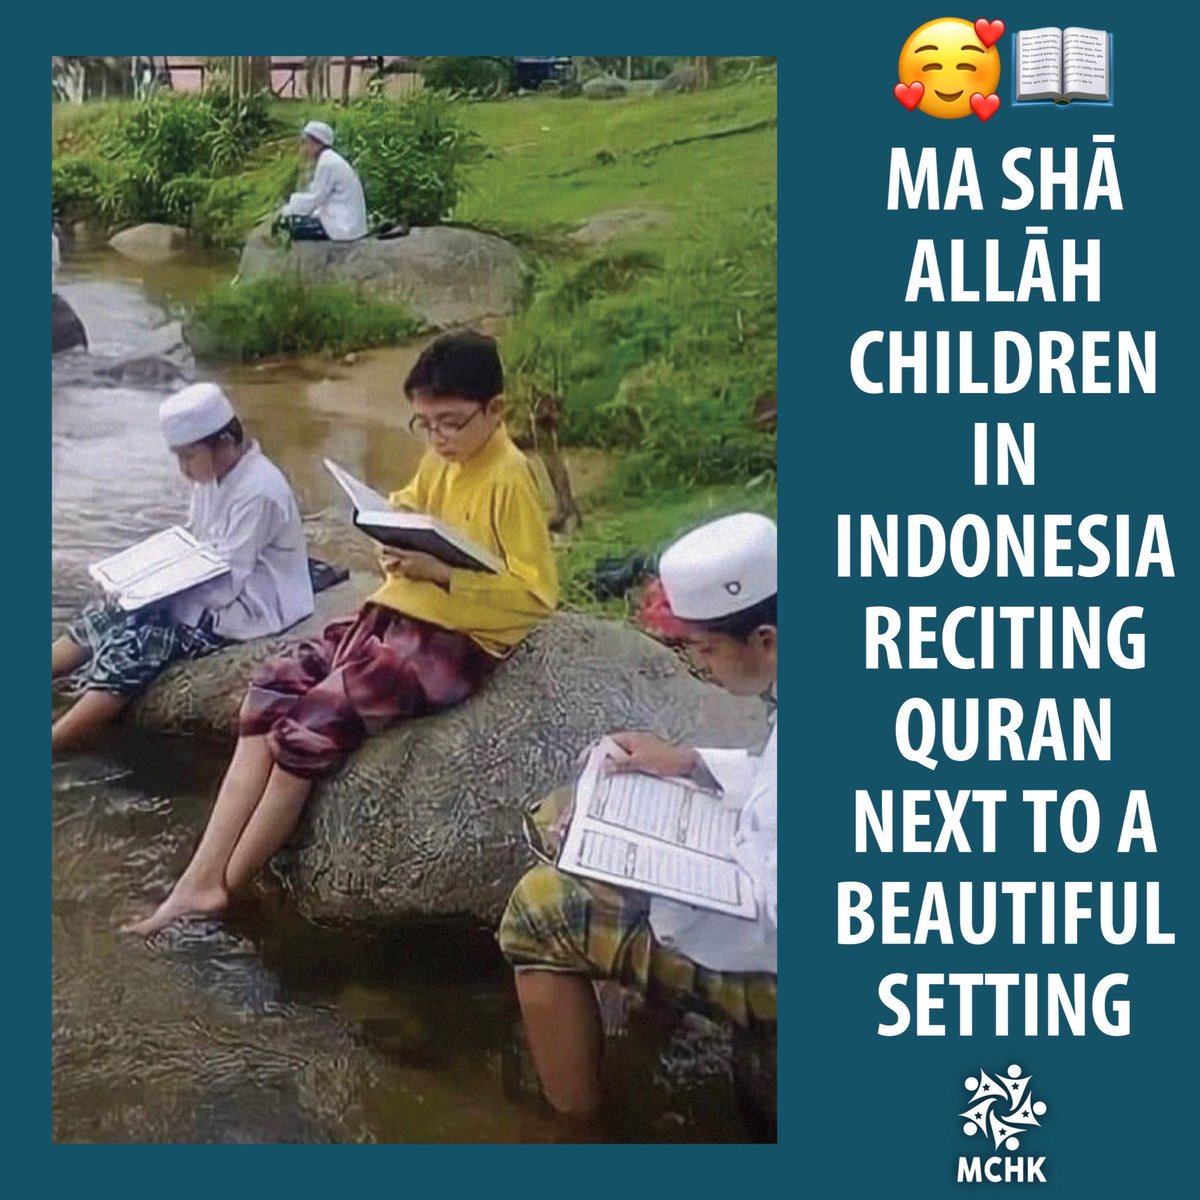 Allahumma barik. The soul, the mind, the heart and the body all at peace with the words of Allah being recited surrounded by His natural blessings. 

#ConnectWithNature #ConnectWithQuran